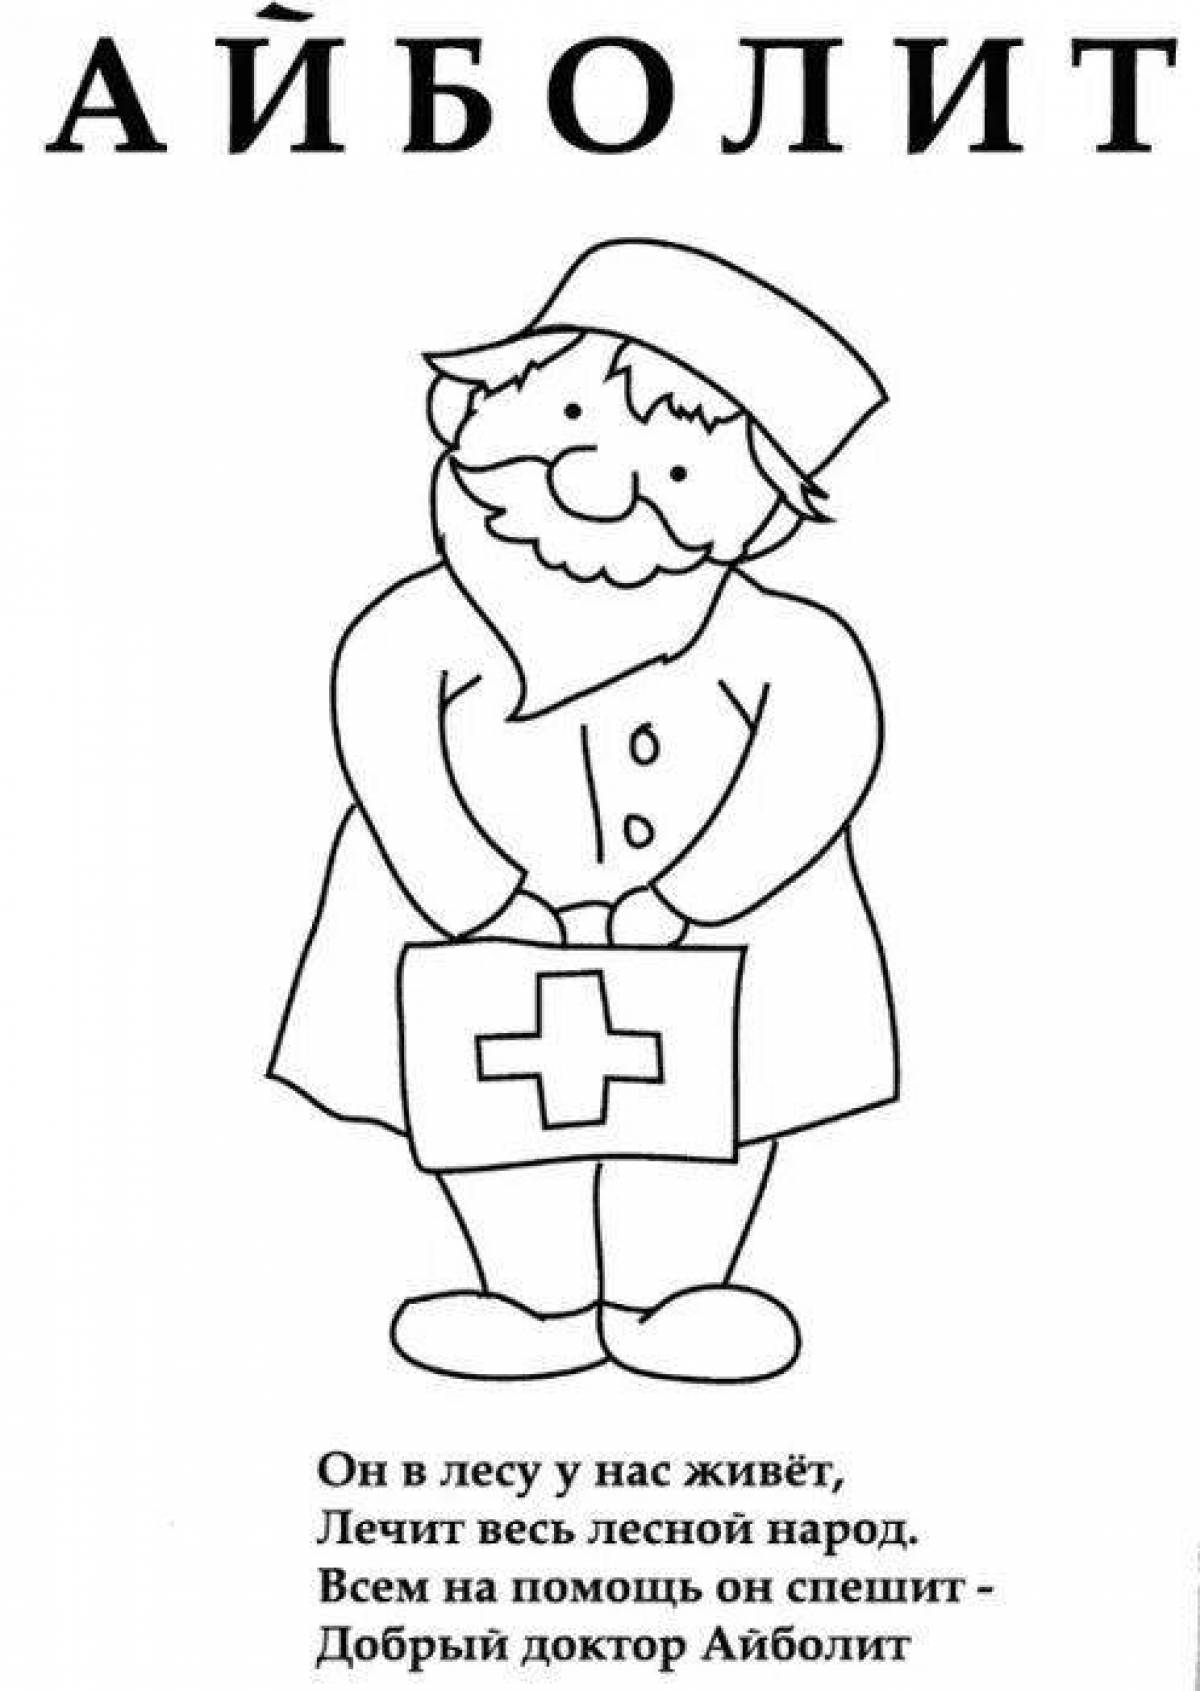 Colorful doctor coloring book for kids